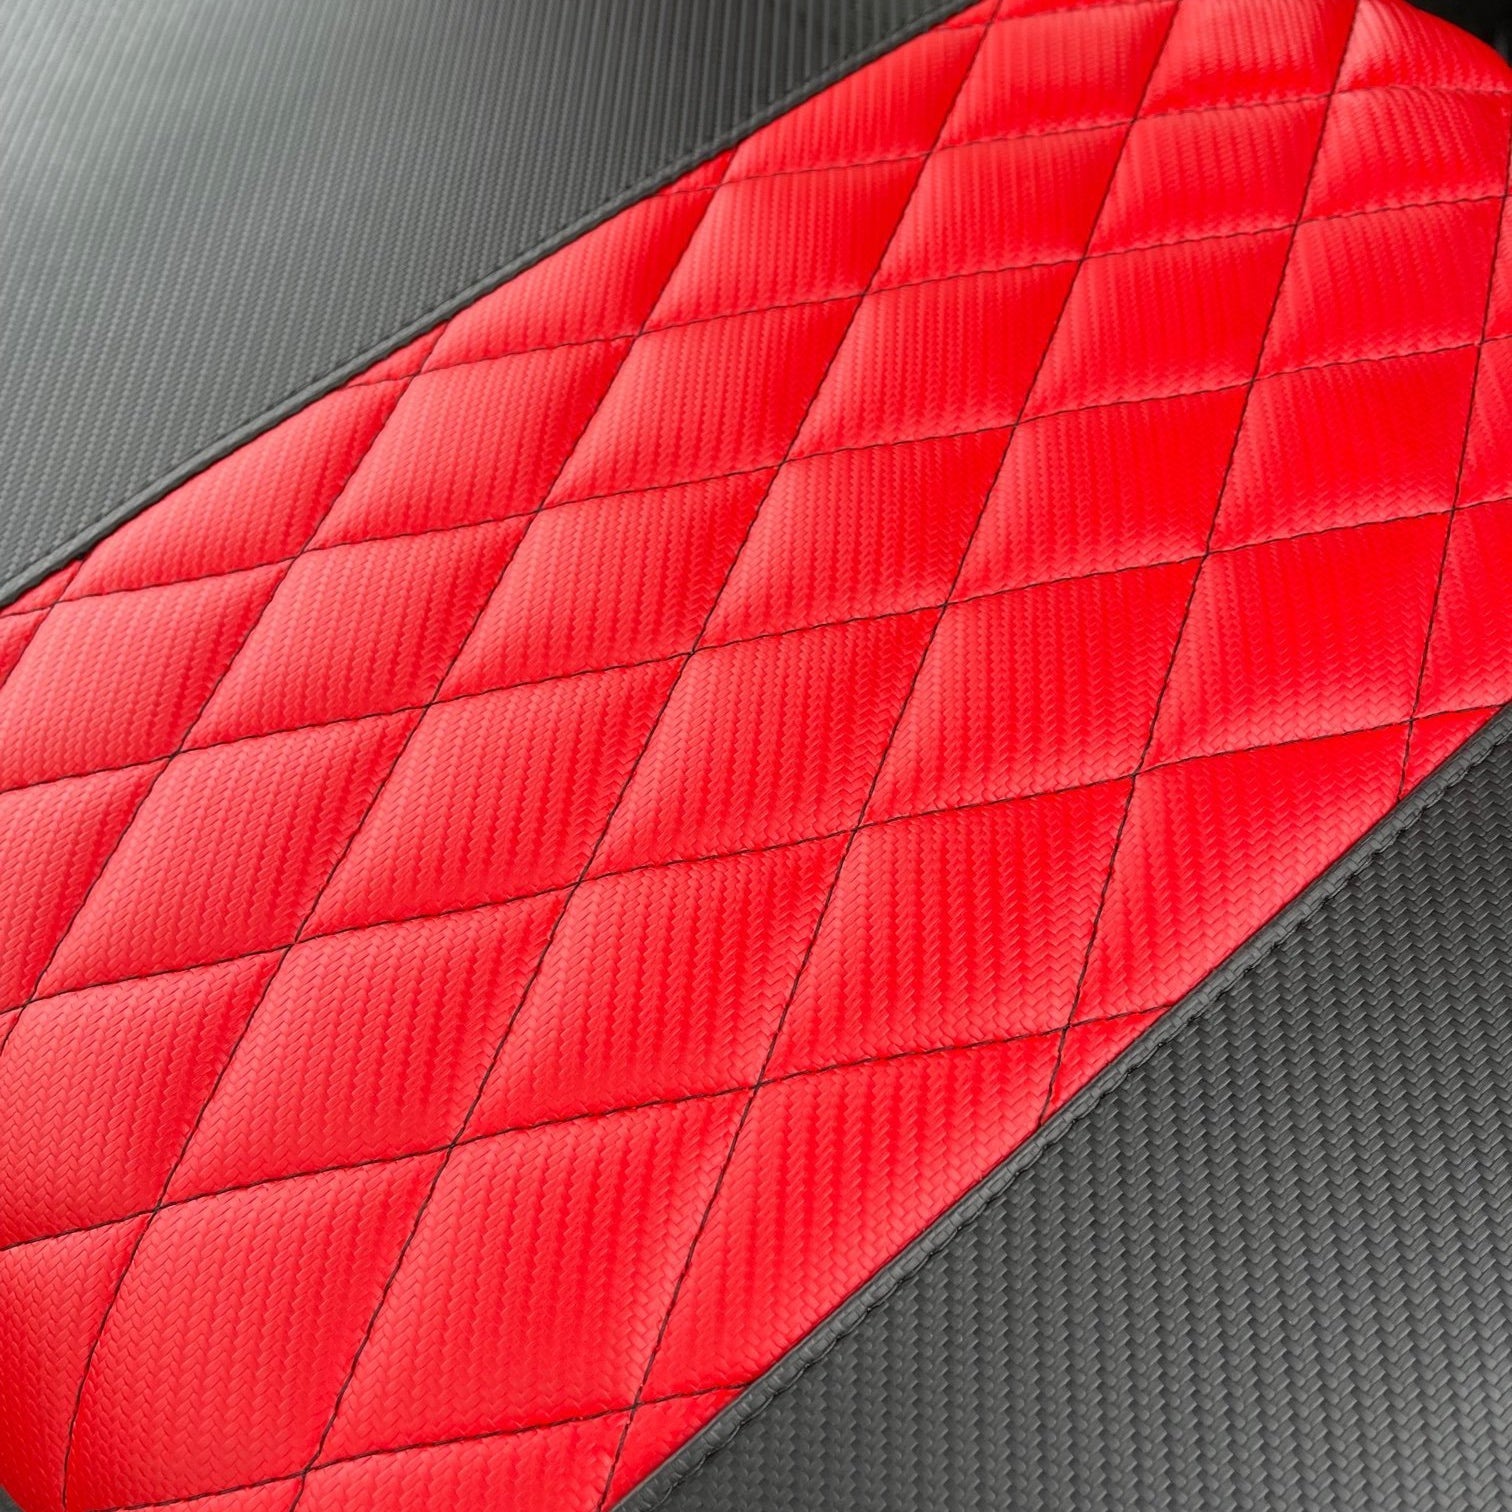 EZ-GO TXT 6 Passenger Seat Covers - Carbon Fiber and Diamond Carbon Fiber Red with Red Stitching